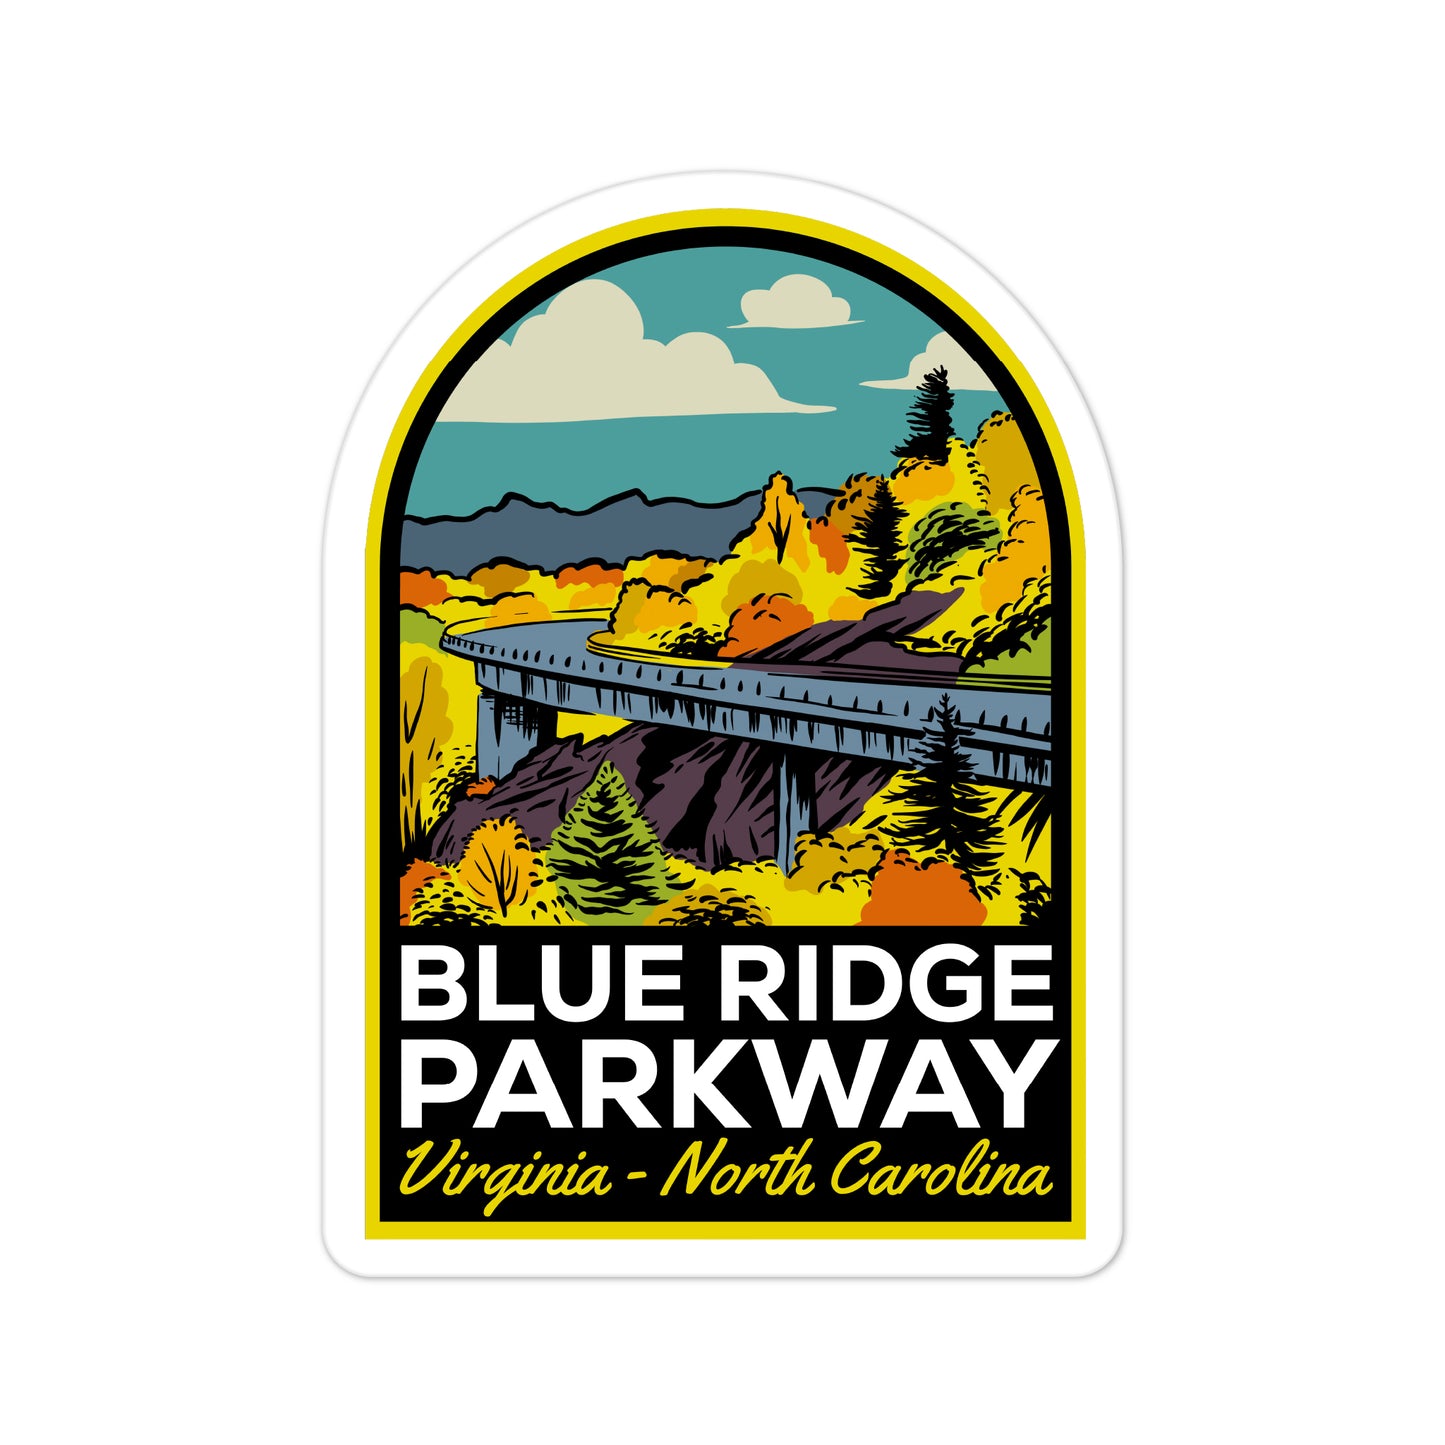 A sticker of the Blue Ridge Parkway